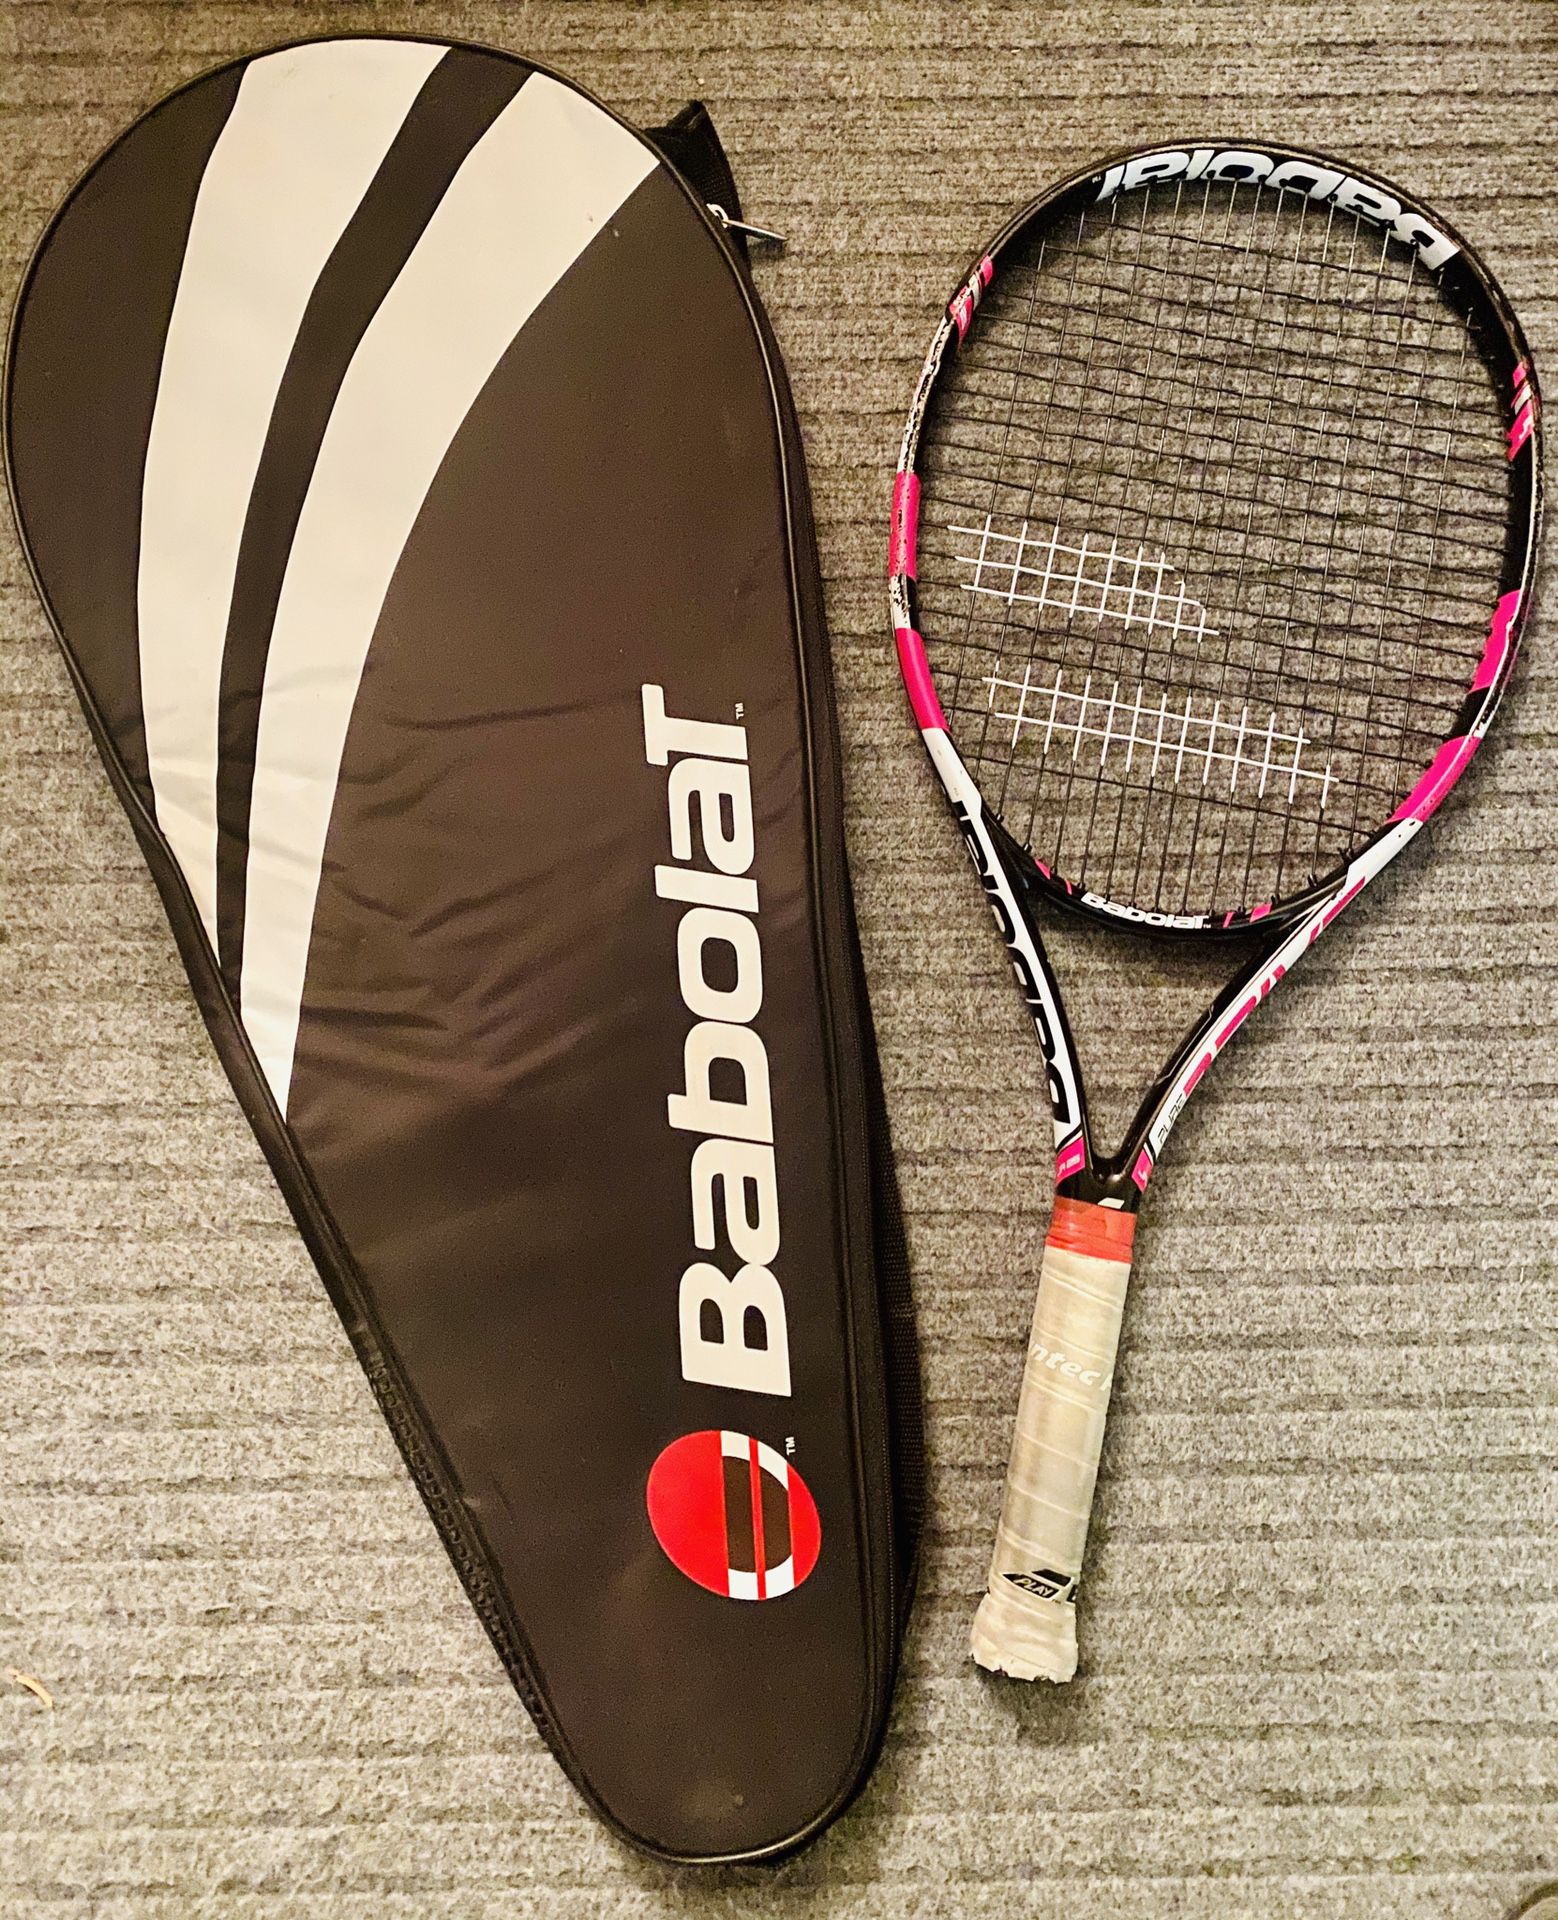 Babolat tennis racket for JR or small adult with bag